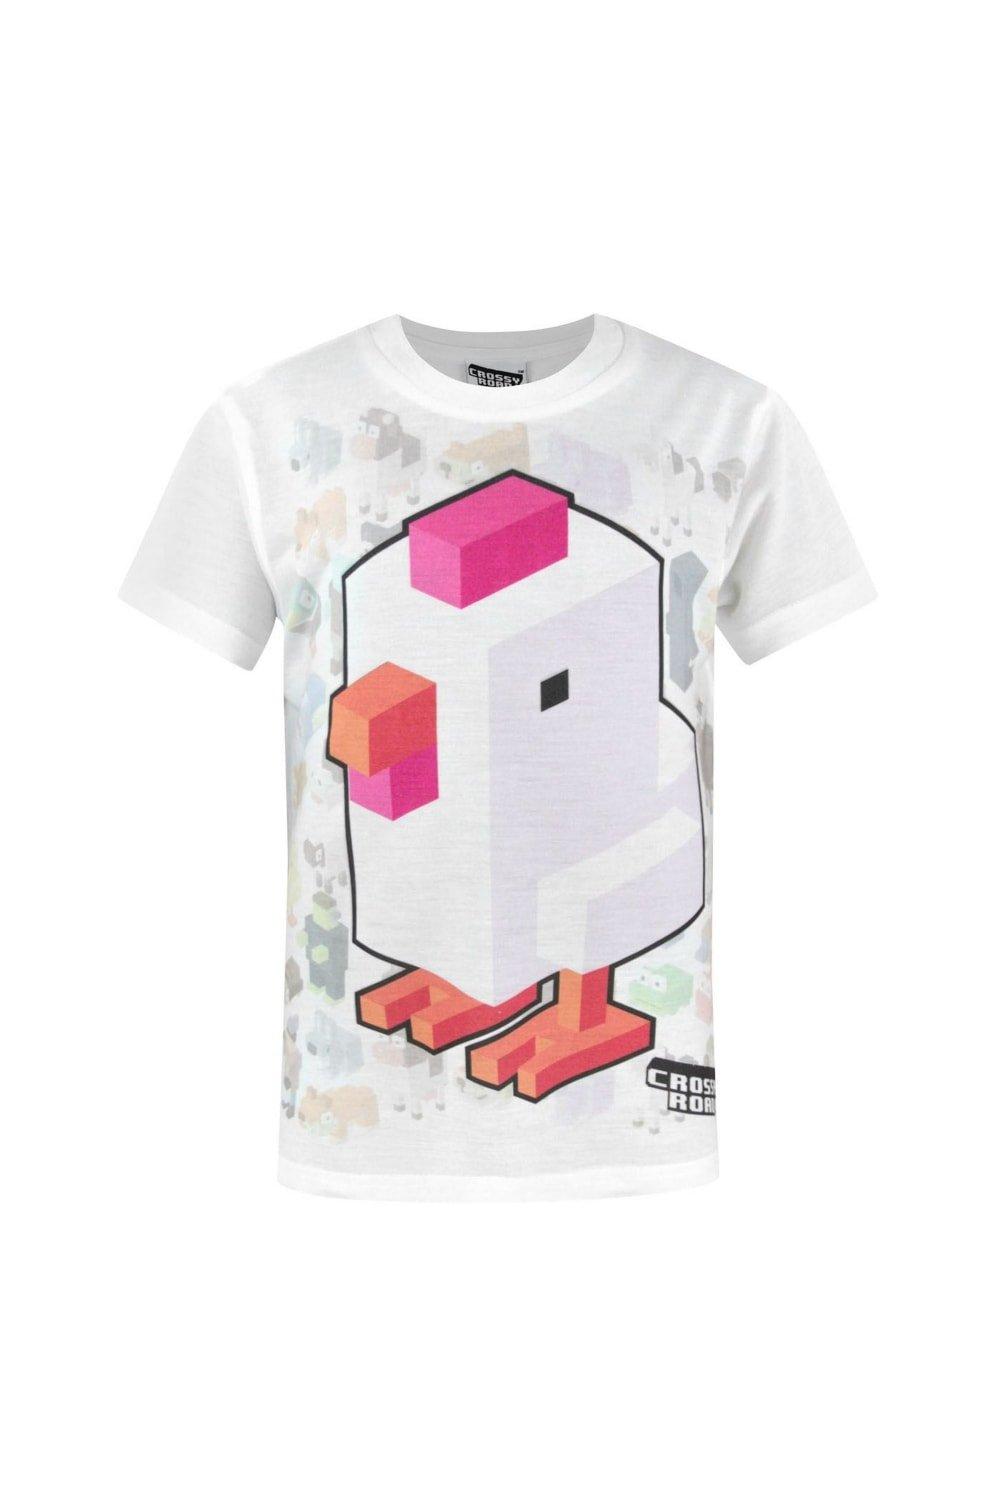 Crossy Road Official All-Over Sublimation Character Design T-Shirt